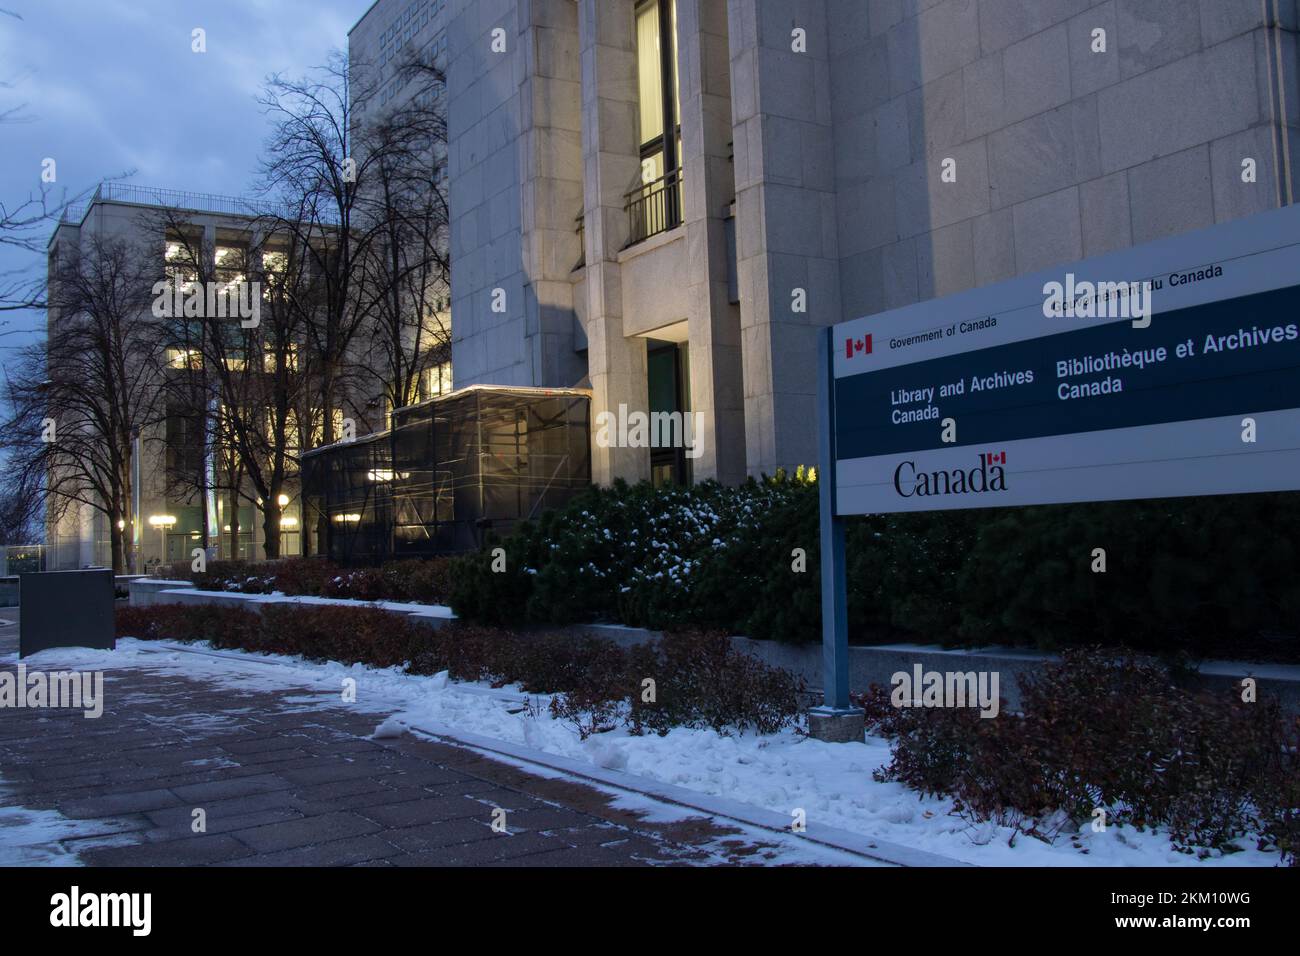 A sign for the Government of Canada office building, Library and Archives Canada, is seen in the early morning in downtown Ottawa. Stock Photo